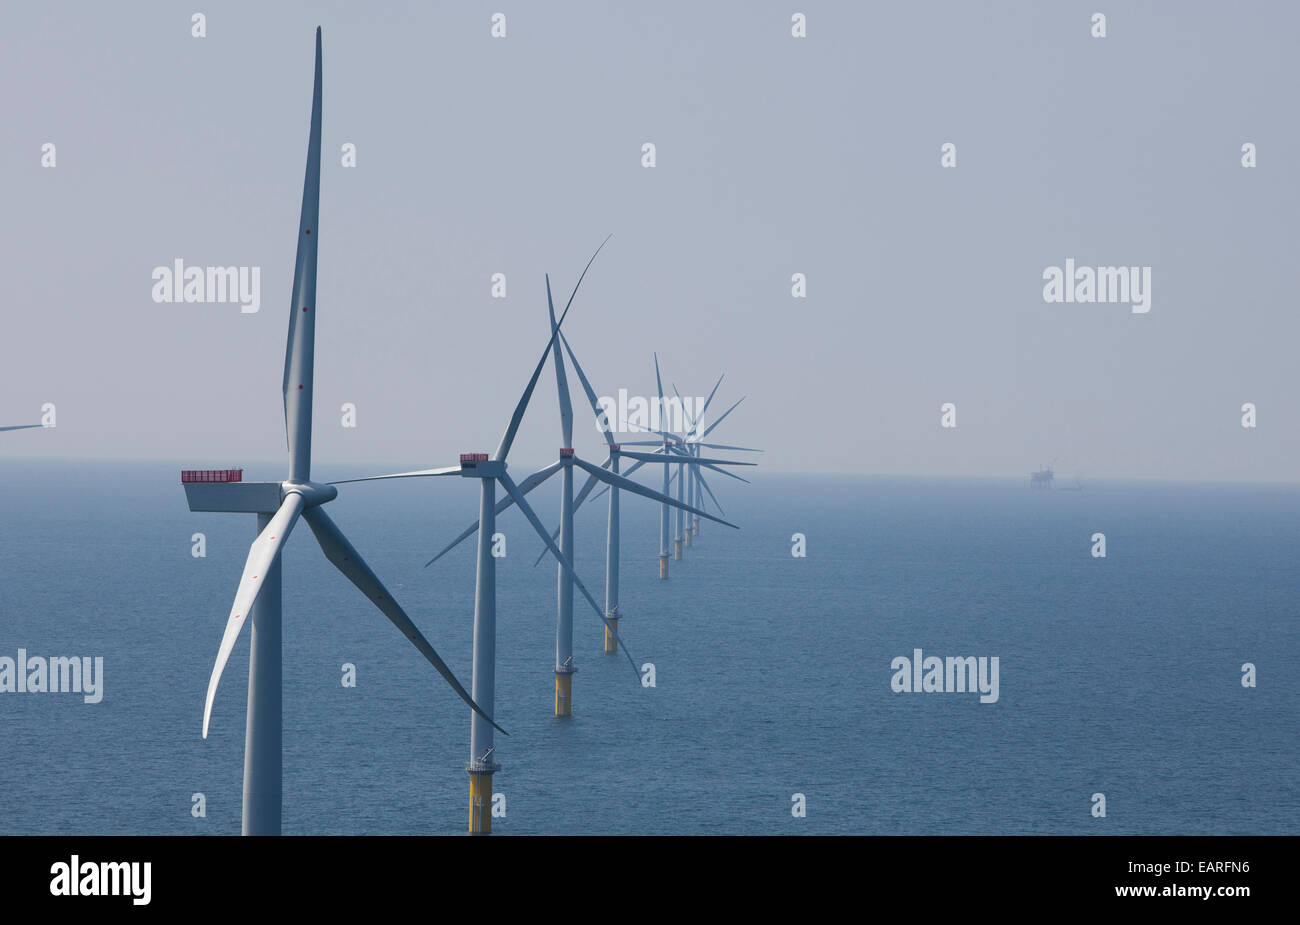 Wind turbines at the Scottish Power's offshore windfarm, West Of Duddon Sands in the Irish Sea off the coast of Cumbria. Stock Photo